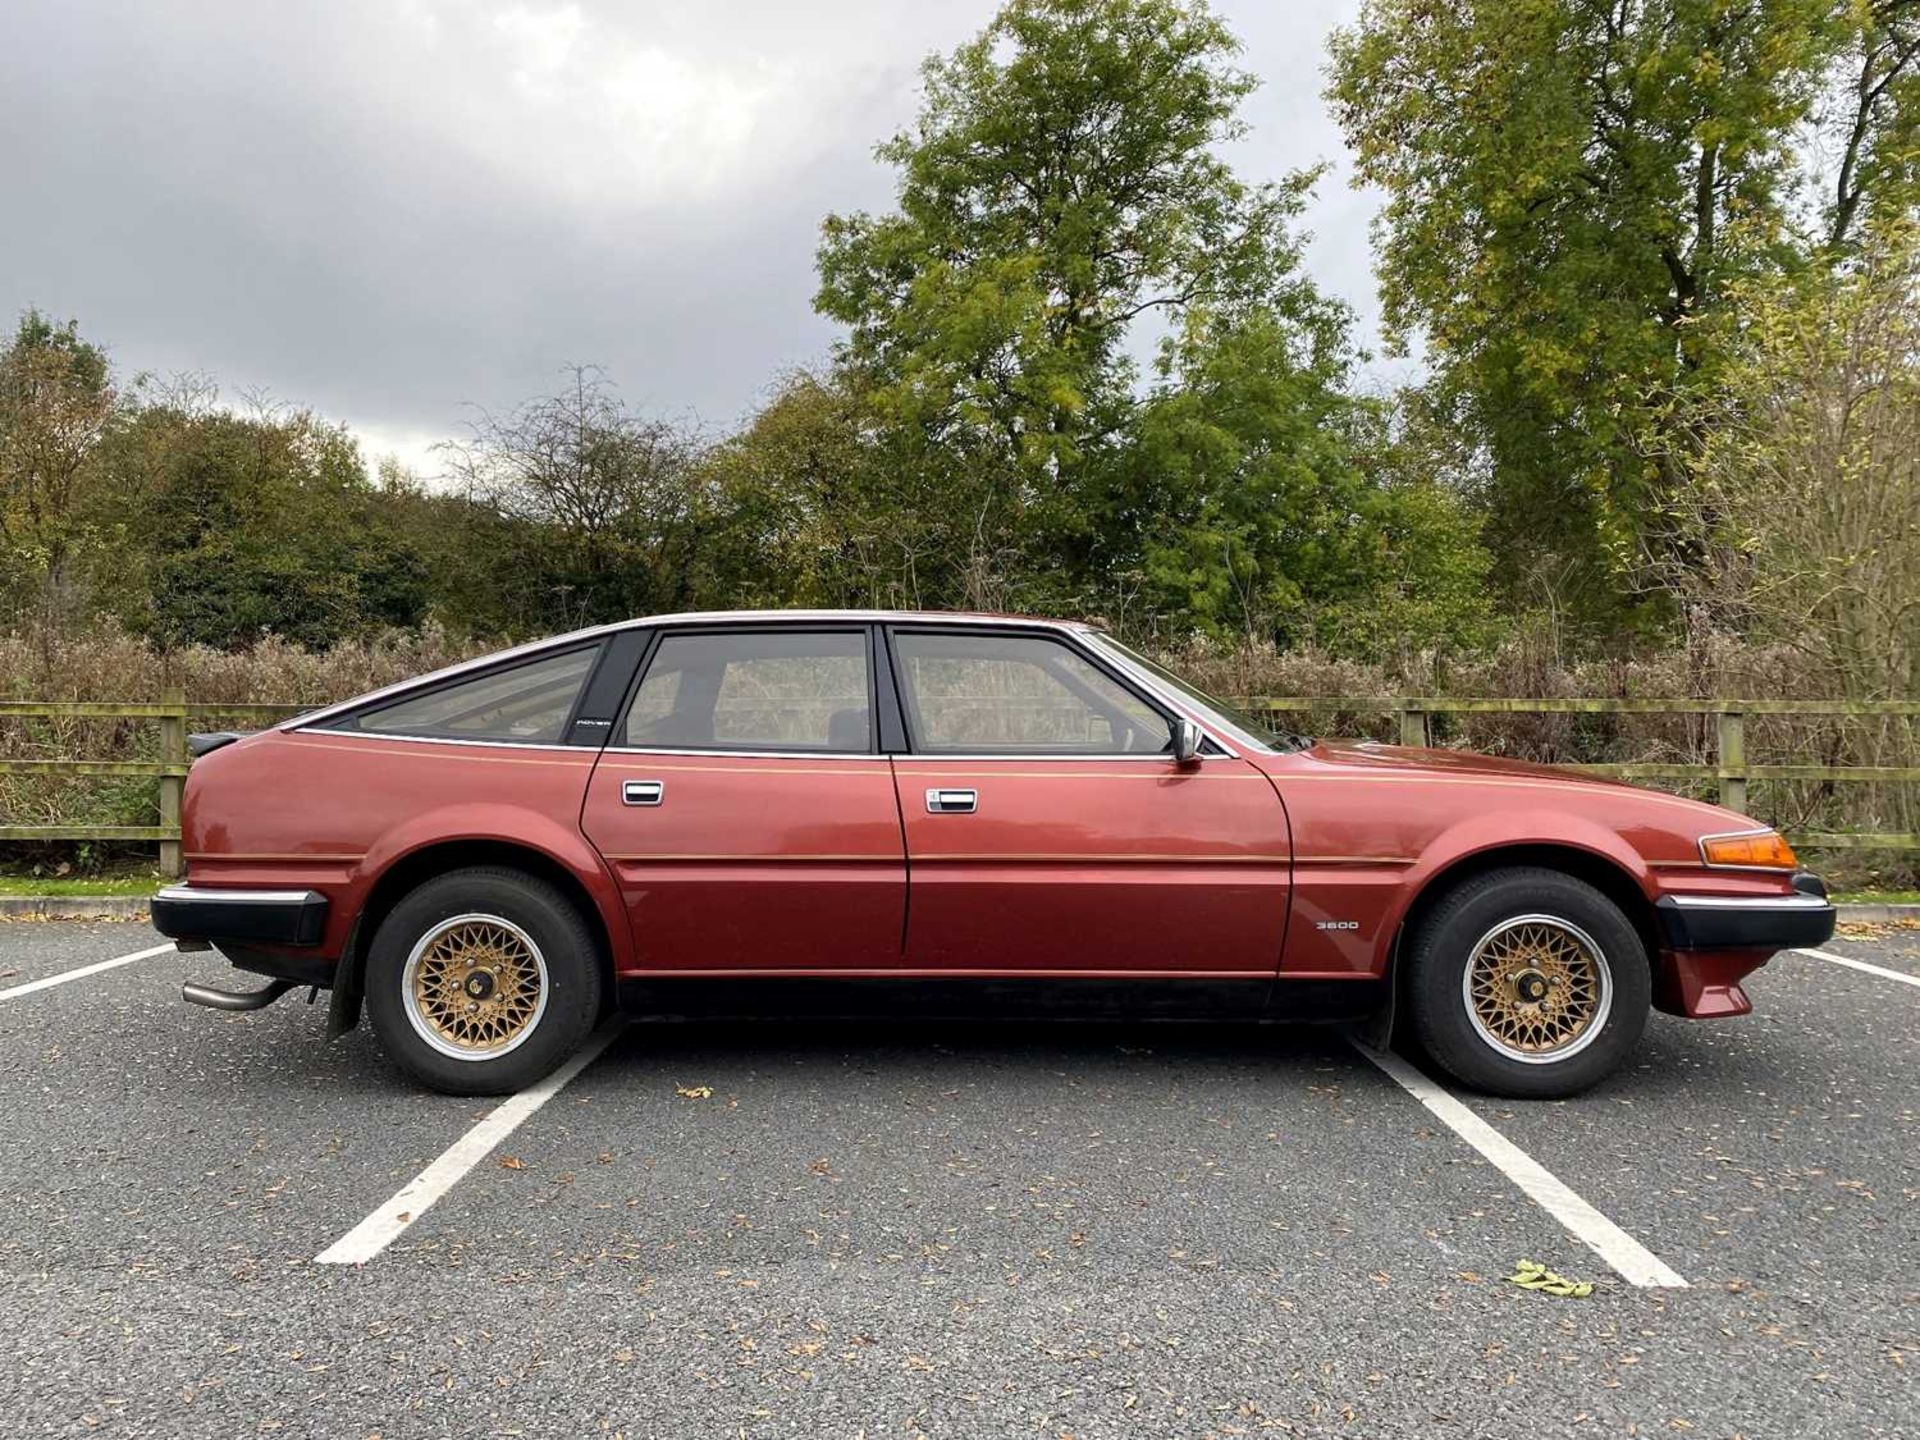 1982 Rover SD1 3500 SE Only 29,000 miles - Image 11 of 100